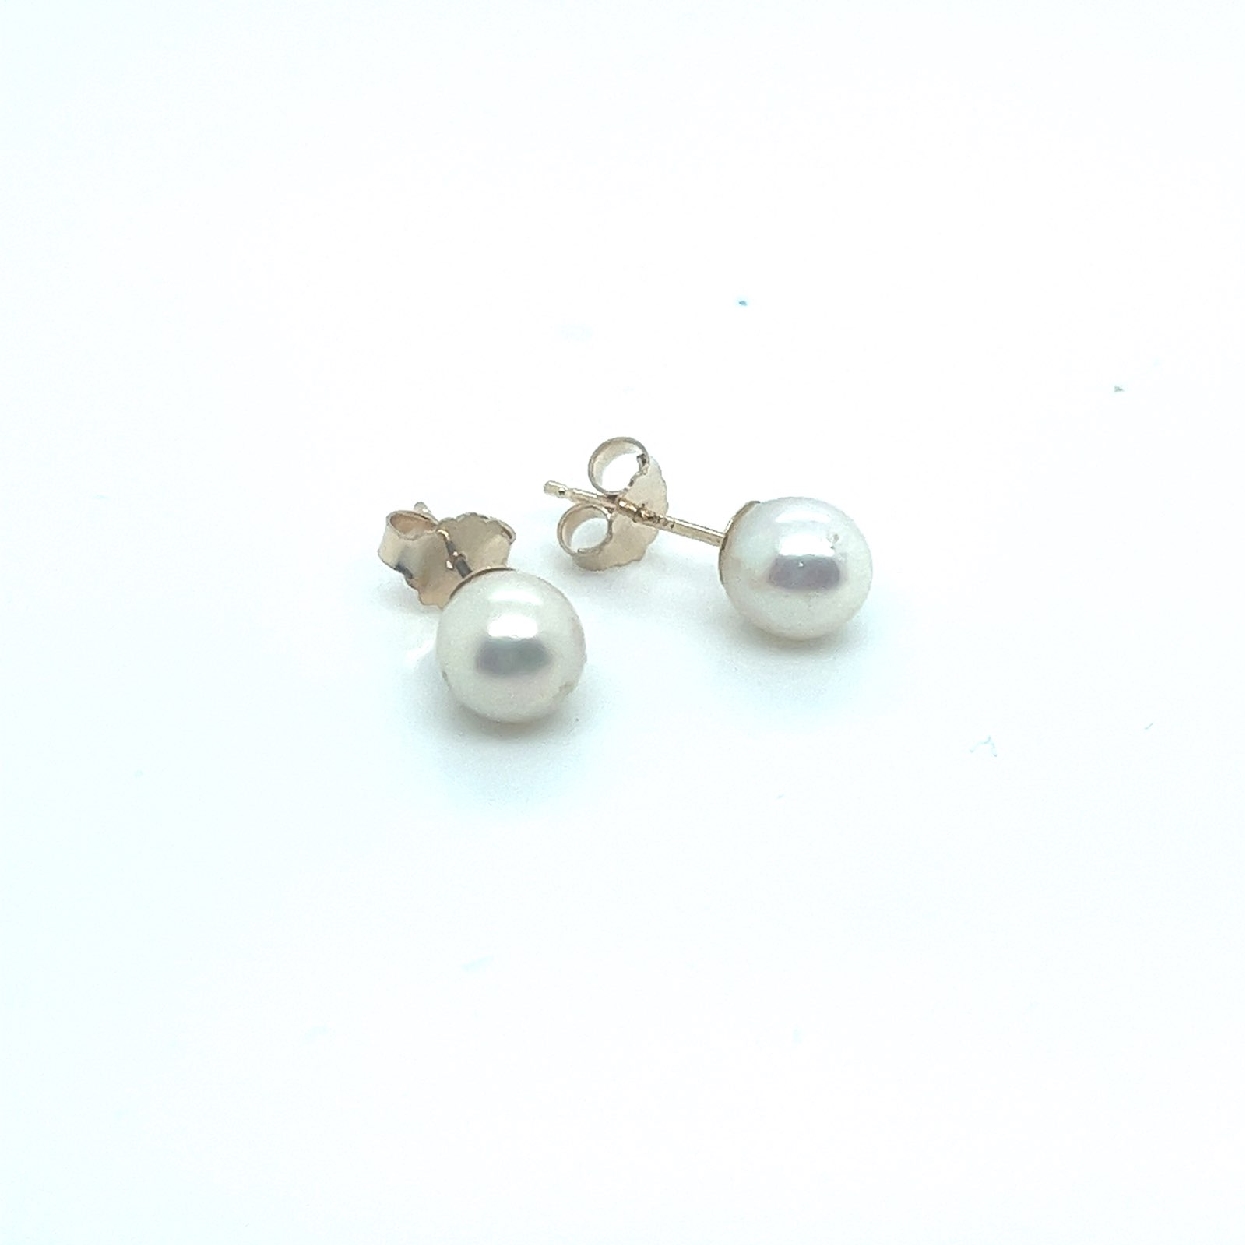 6mm Salt Water Pearl Stud Earrings on 14K Yellow Gold Posts with Friction Backs